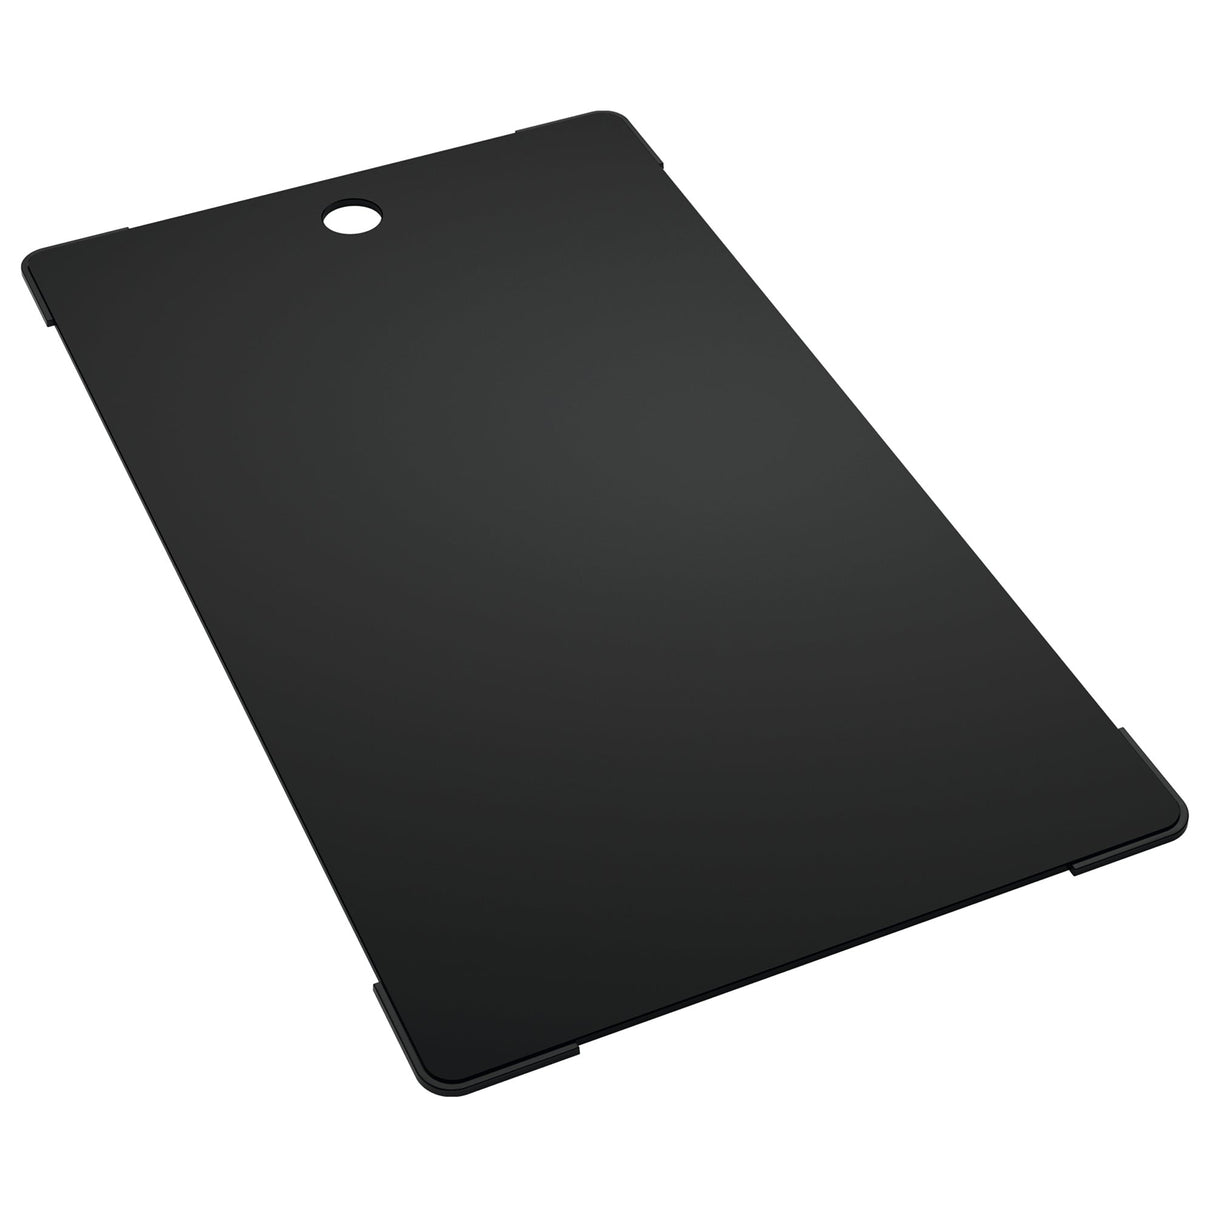 FRANKE PT-40S 10.9-in. x 18.5-in. Tempered Glass Cutting Board for Pescara Series Sinks